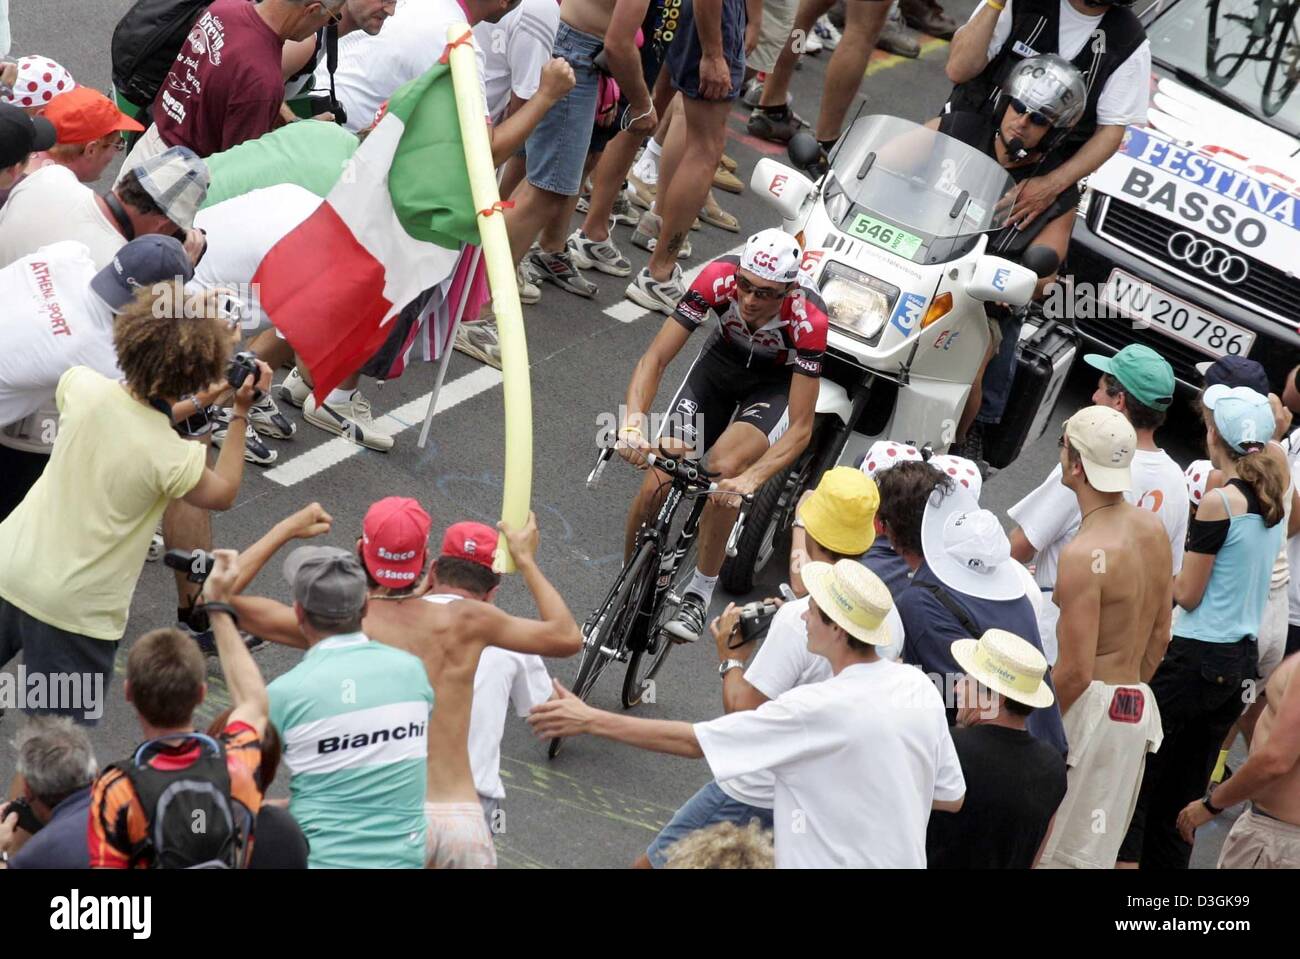 (dpa) - Italian rider Ivan Basso of Team CSC on his bicycle along a narrow alley of cheering fans during the 16th stage of the Tour de France towards L'Alpe d'Huez, France, 21 July 2004. This traditional stretch is a 15.5 km long mountain time trial which consists of 21 serpentines with a difference in elevation of 1130 metres from Bourg-d'Oisans to the winter ski resort of Ski-Ort Stock Photo